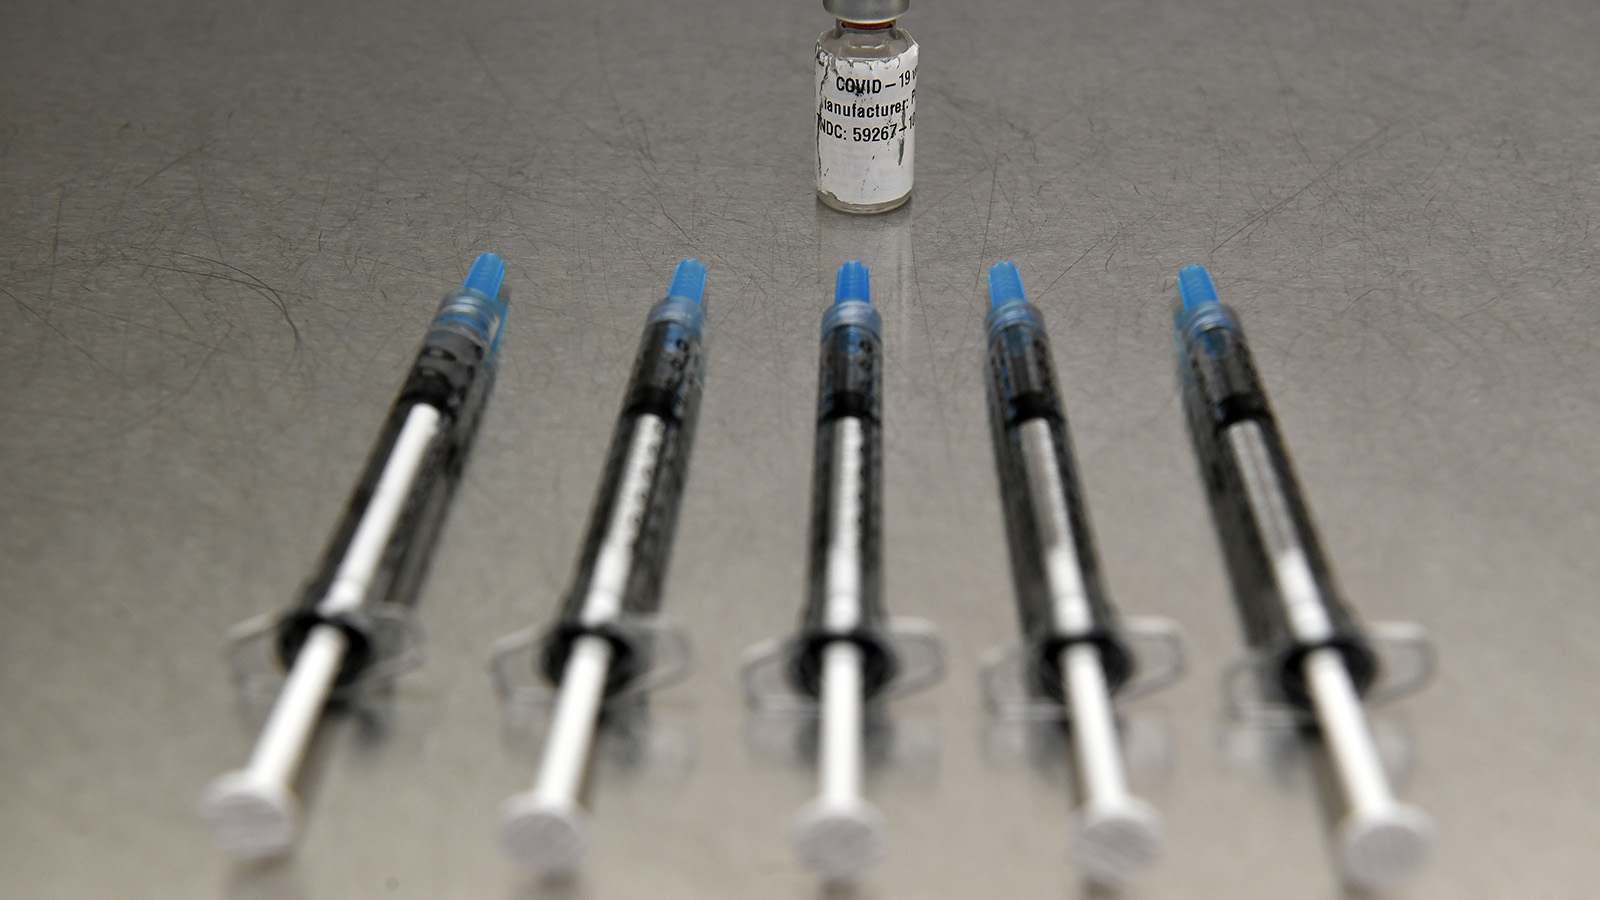 From one vial of the mock Covid-19 vaccines pharmacists will reconstitute the vaccine to create five doses per vial at Vail Health Hospital on December 8, 2020.